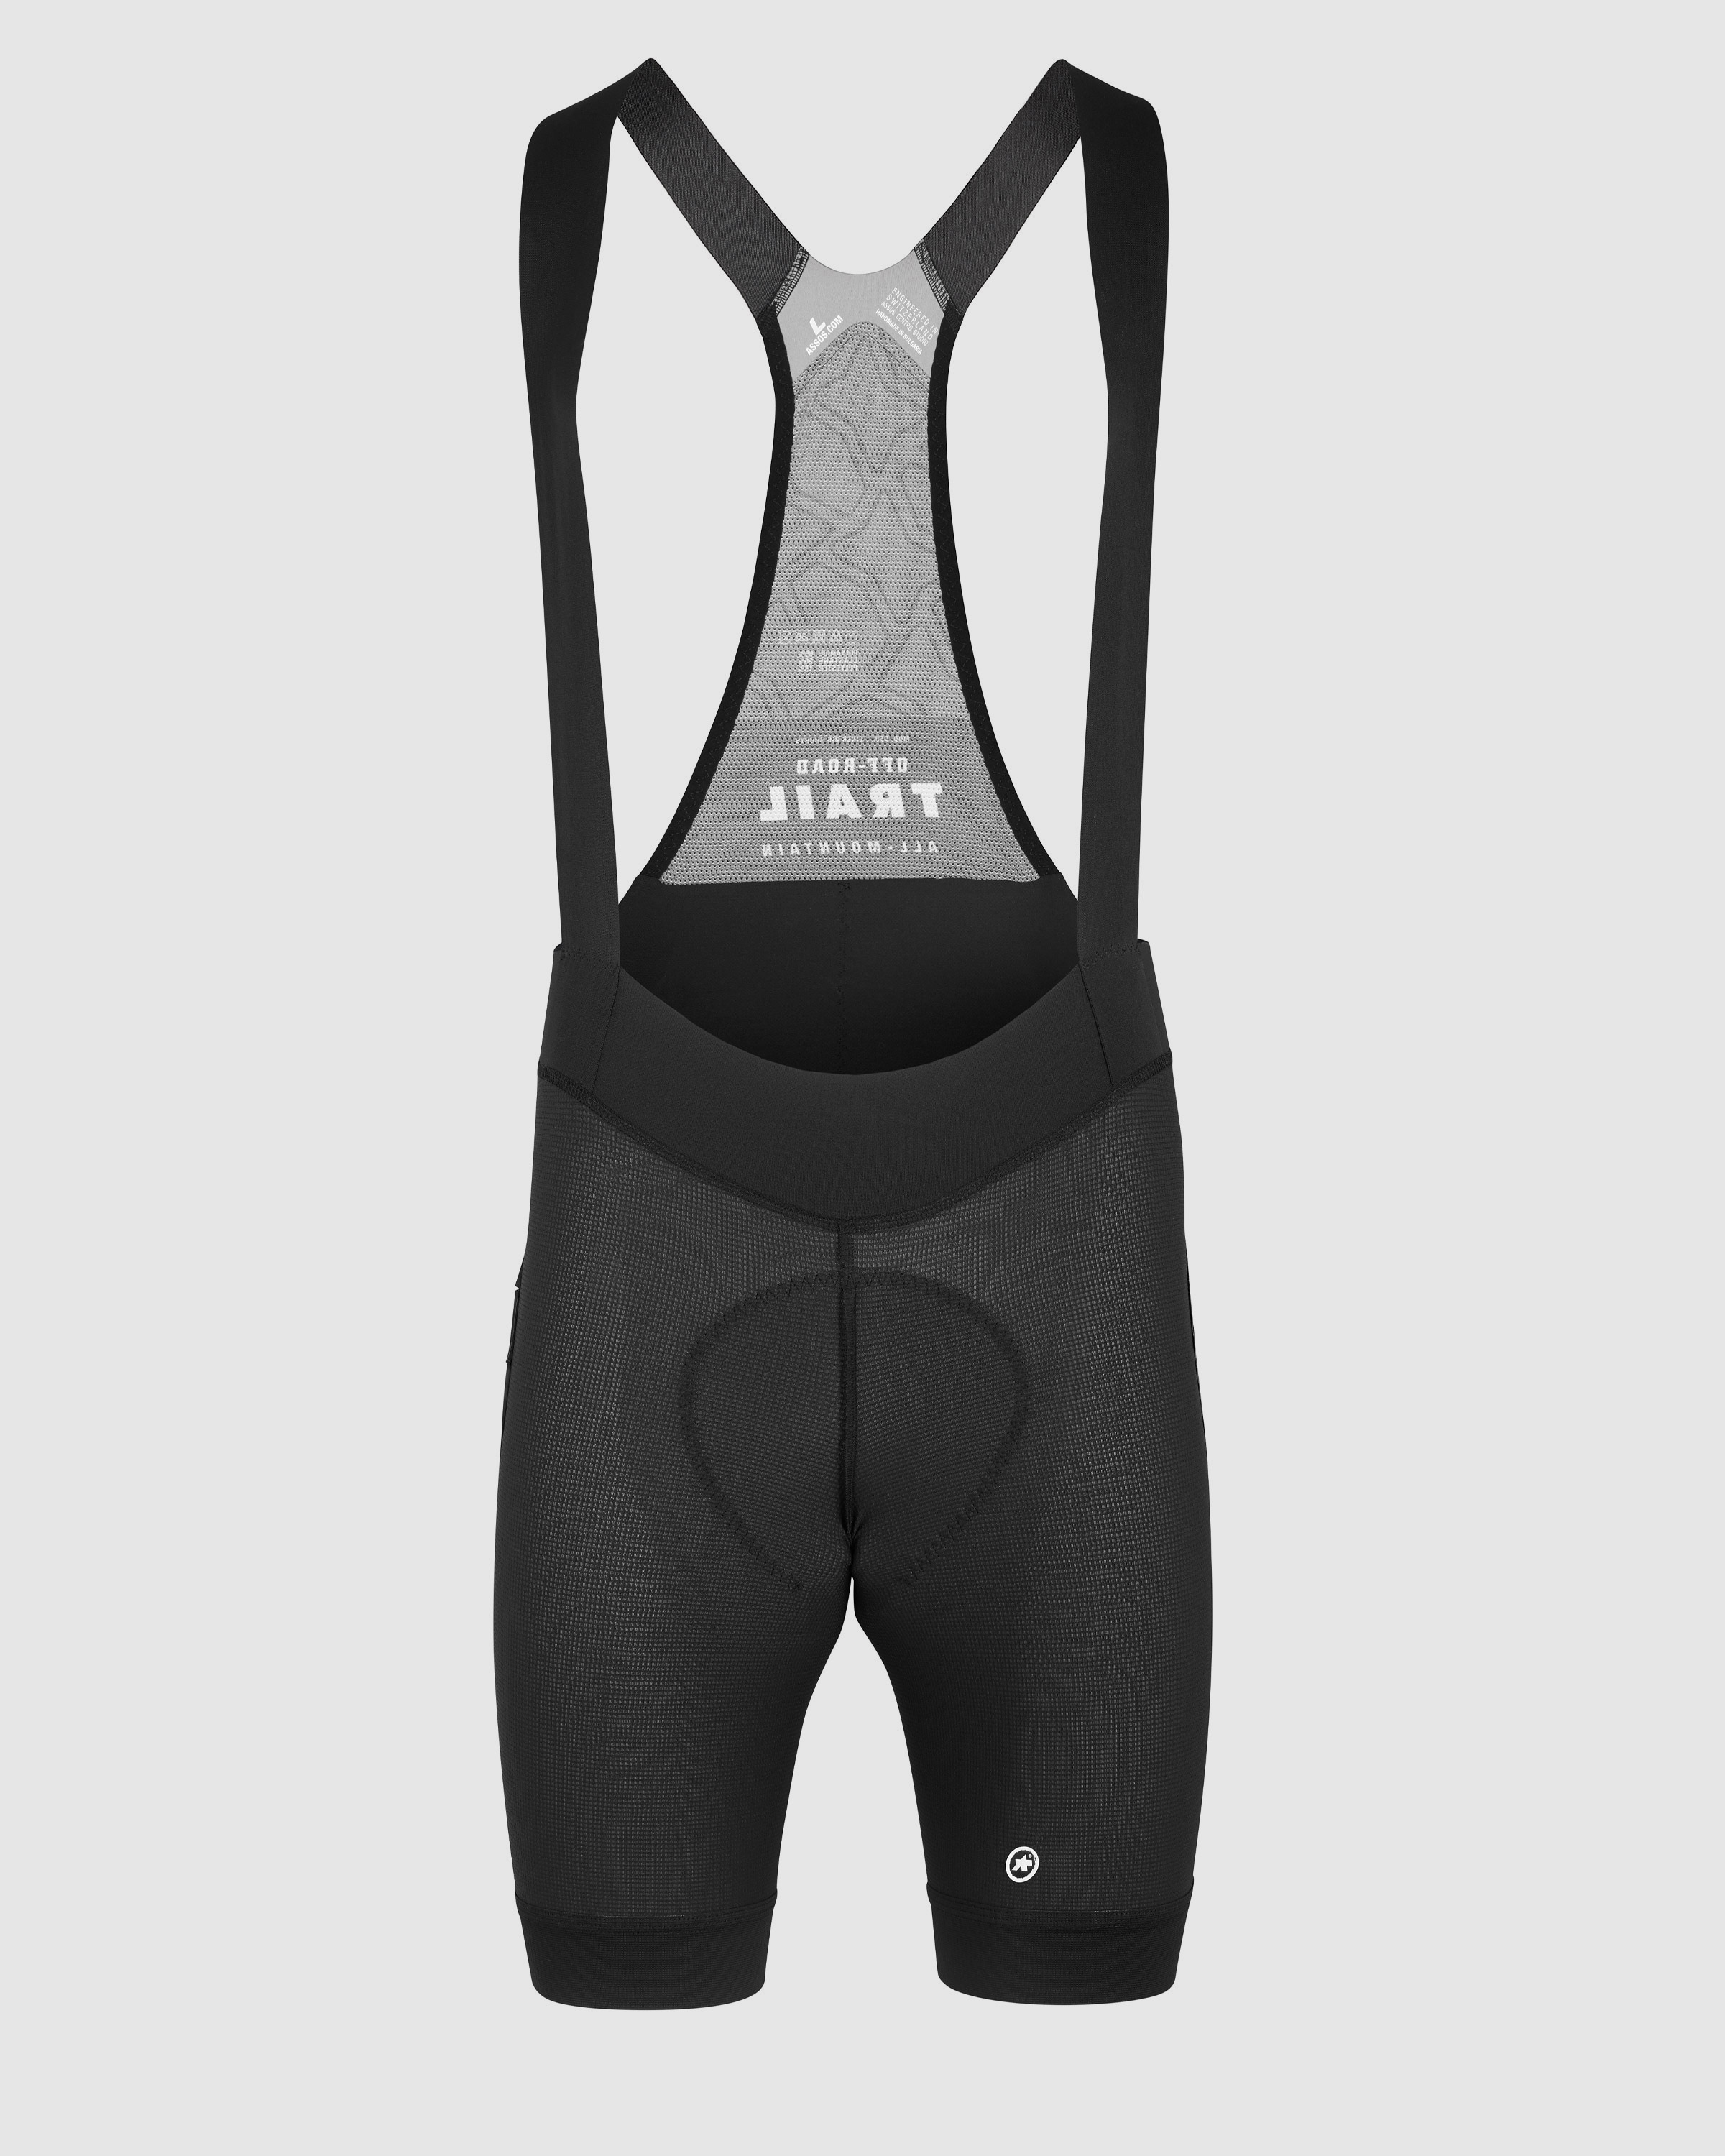 TRAIL Liner Bib Shorts - ASSOS Of Switzerland - Official Outlet